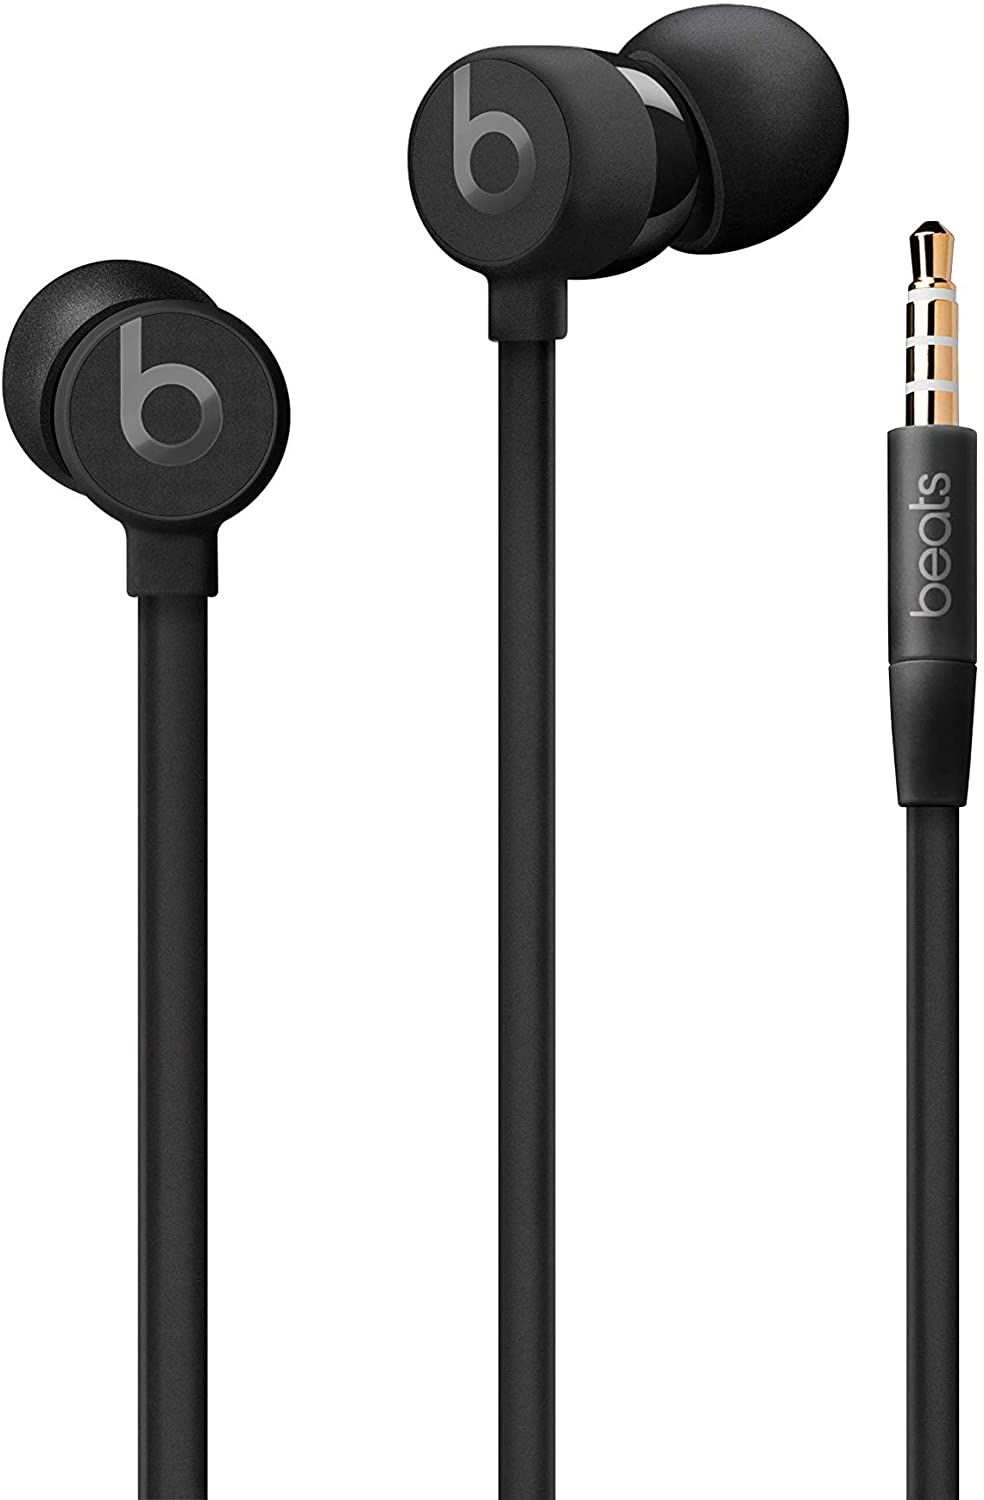 Best Wired Earbuds (Updated 2020)